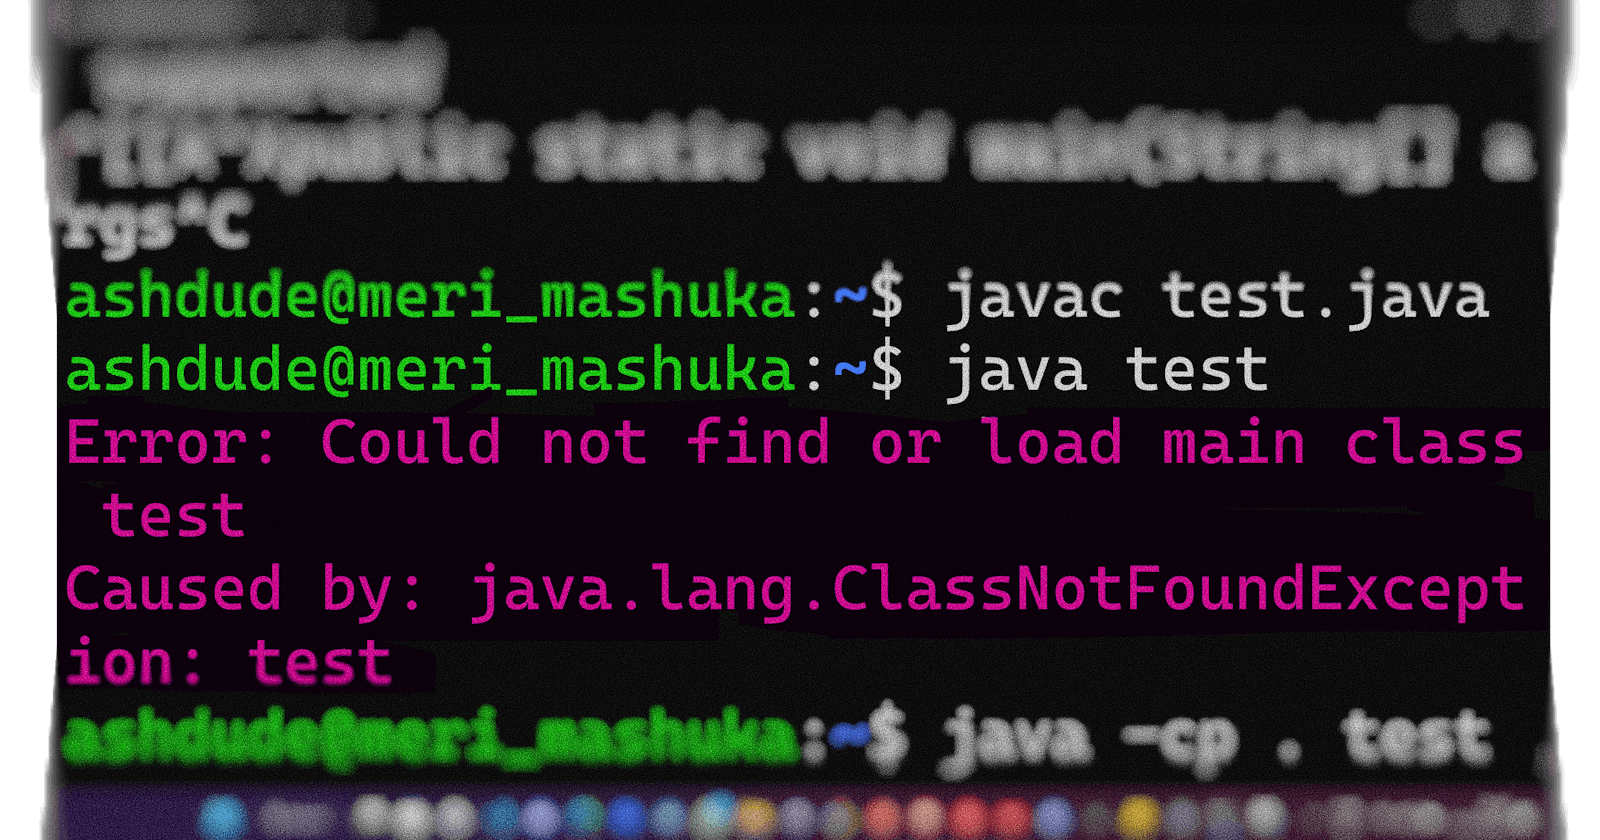 Troubleshooting the "Error: Could not find or load main class" in Java - A Step-by-Step Guide